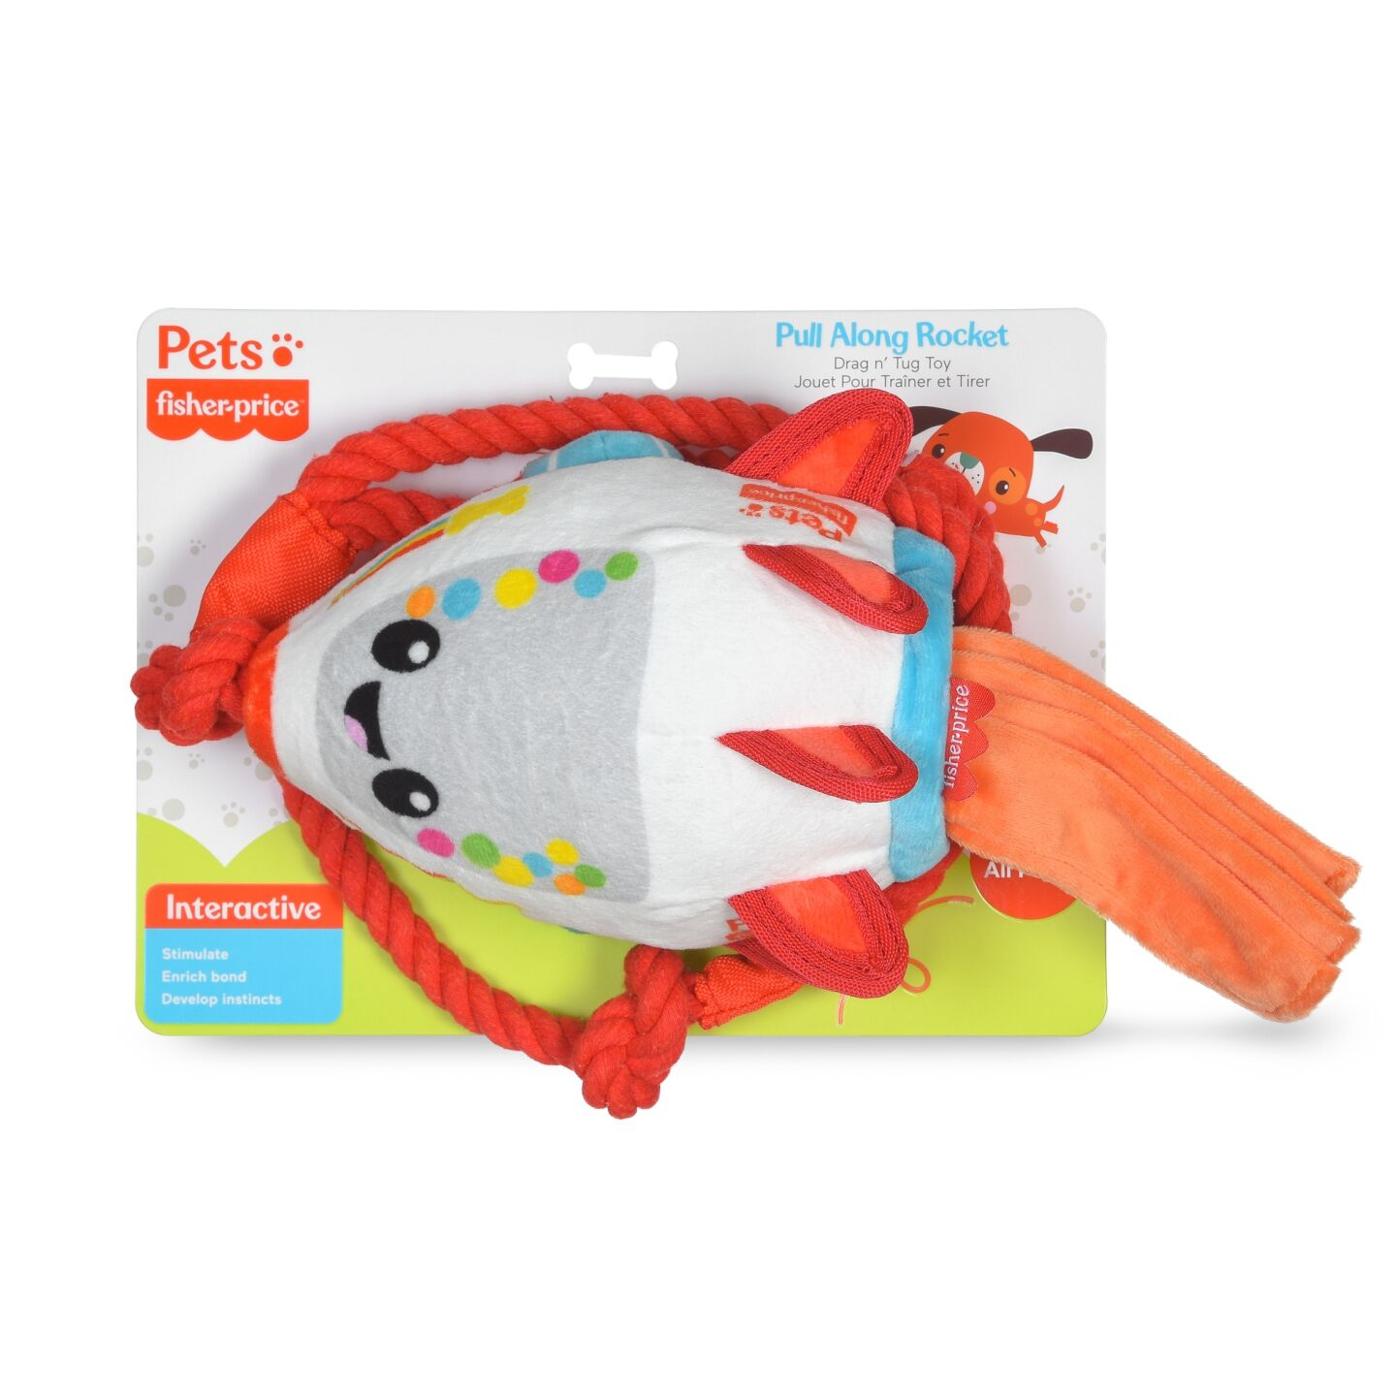 PetSmart Debuts Exclusive Fisher-Price Puppy Toy Line